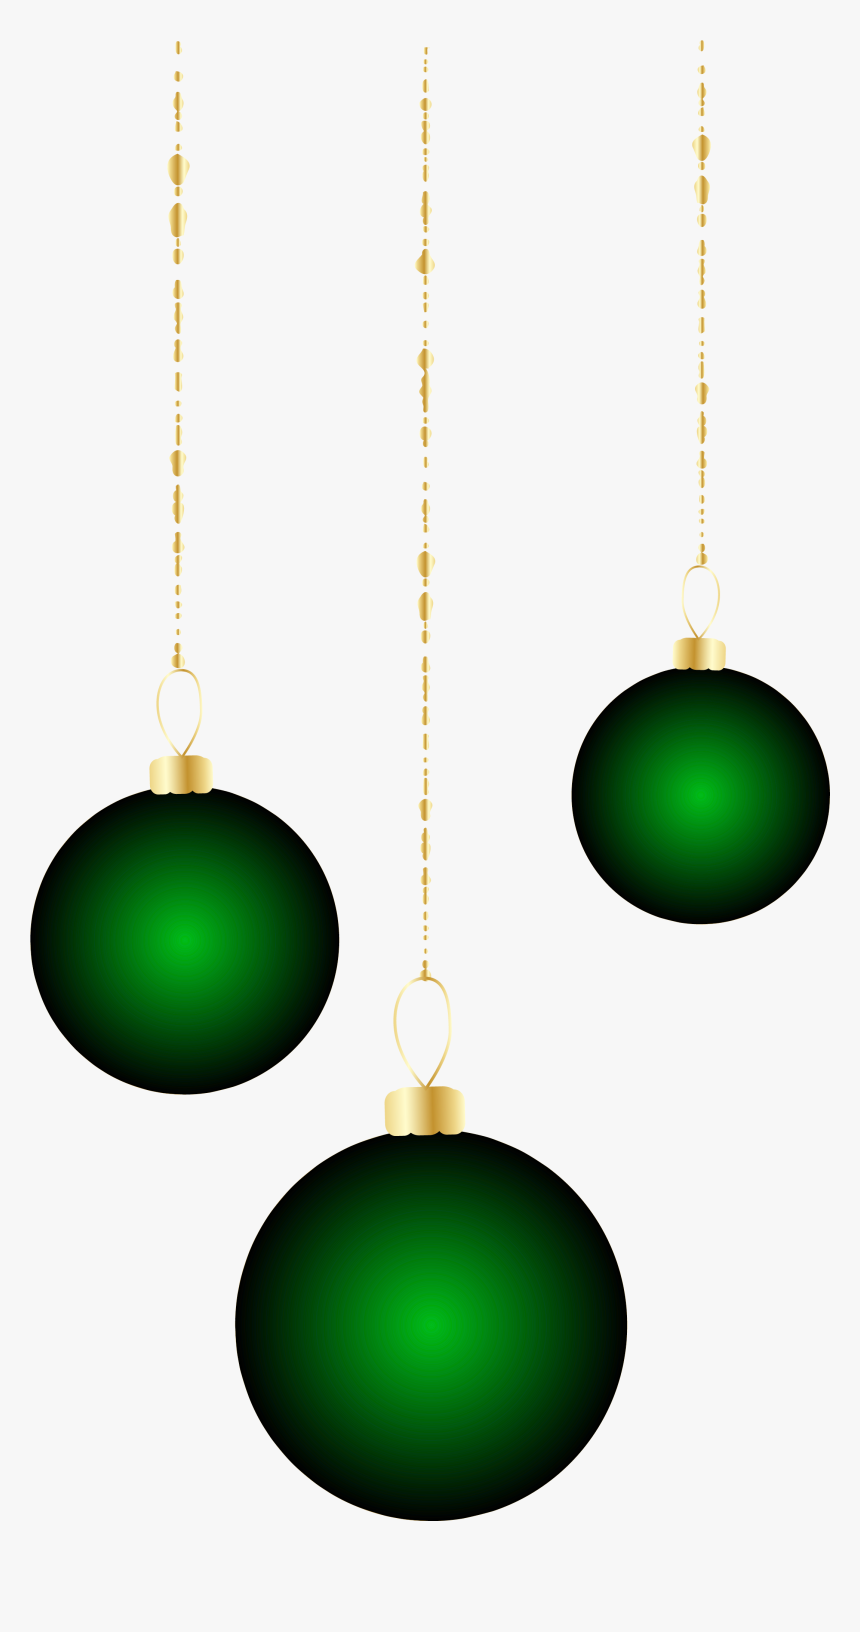 Christmas Jewerly Ornaments Png - Blue Ornaments Transparent, Png Download, Free Download